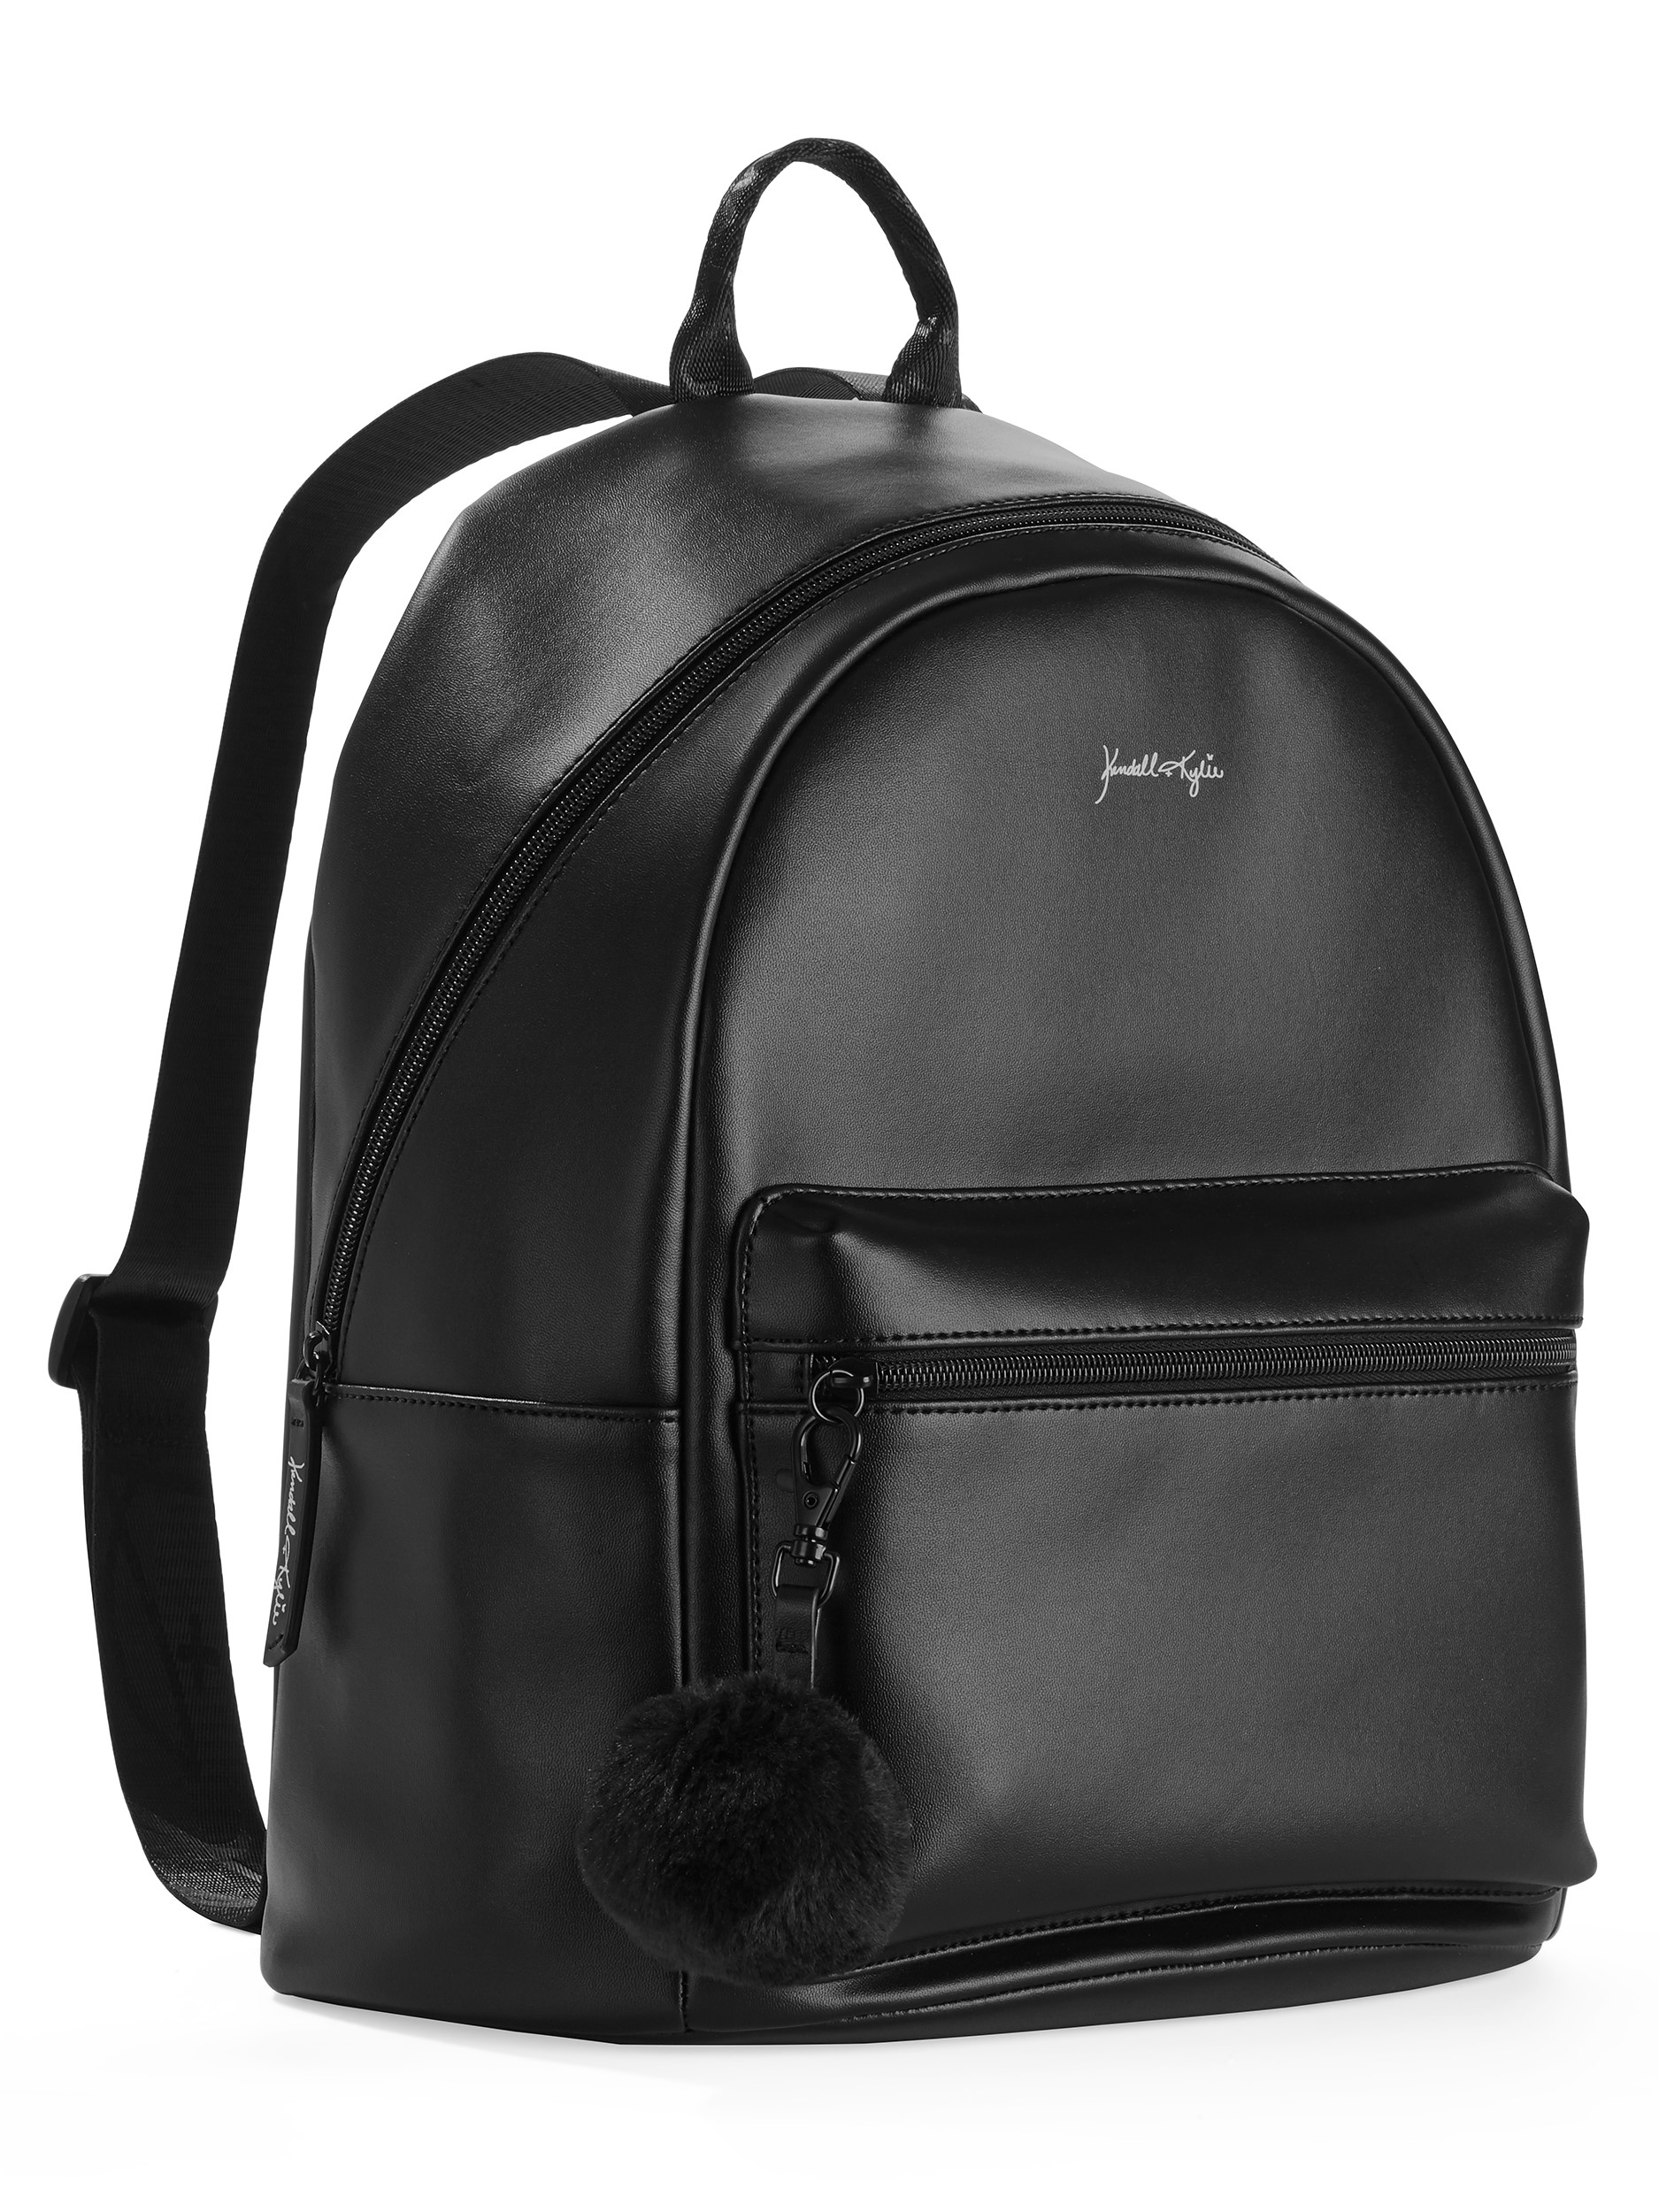 Kendall + Kylie for Walmart Large Backpack with Pom - image 4 of 5